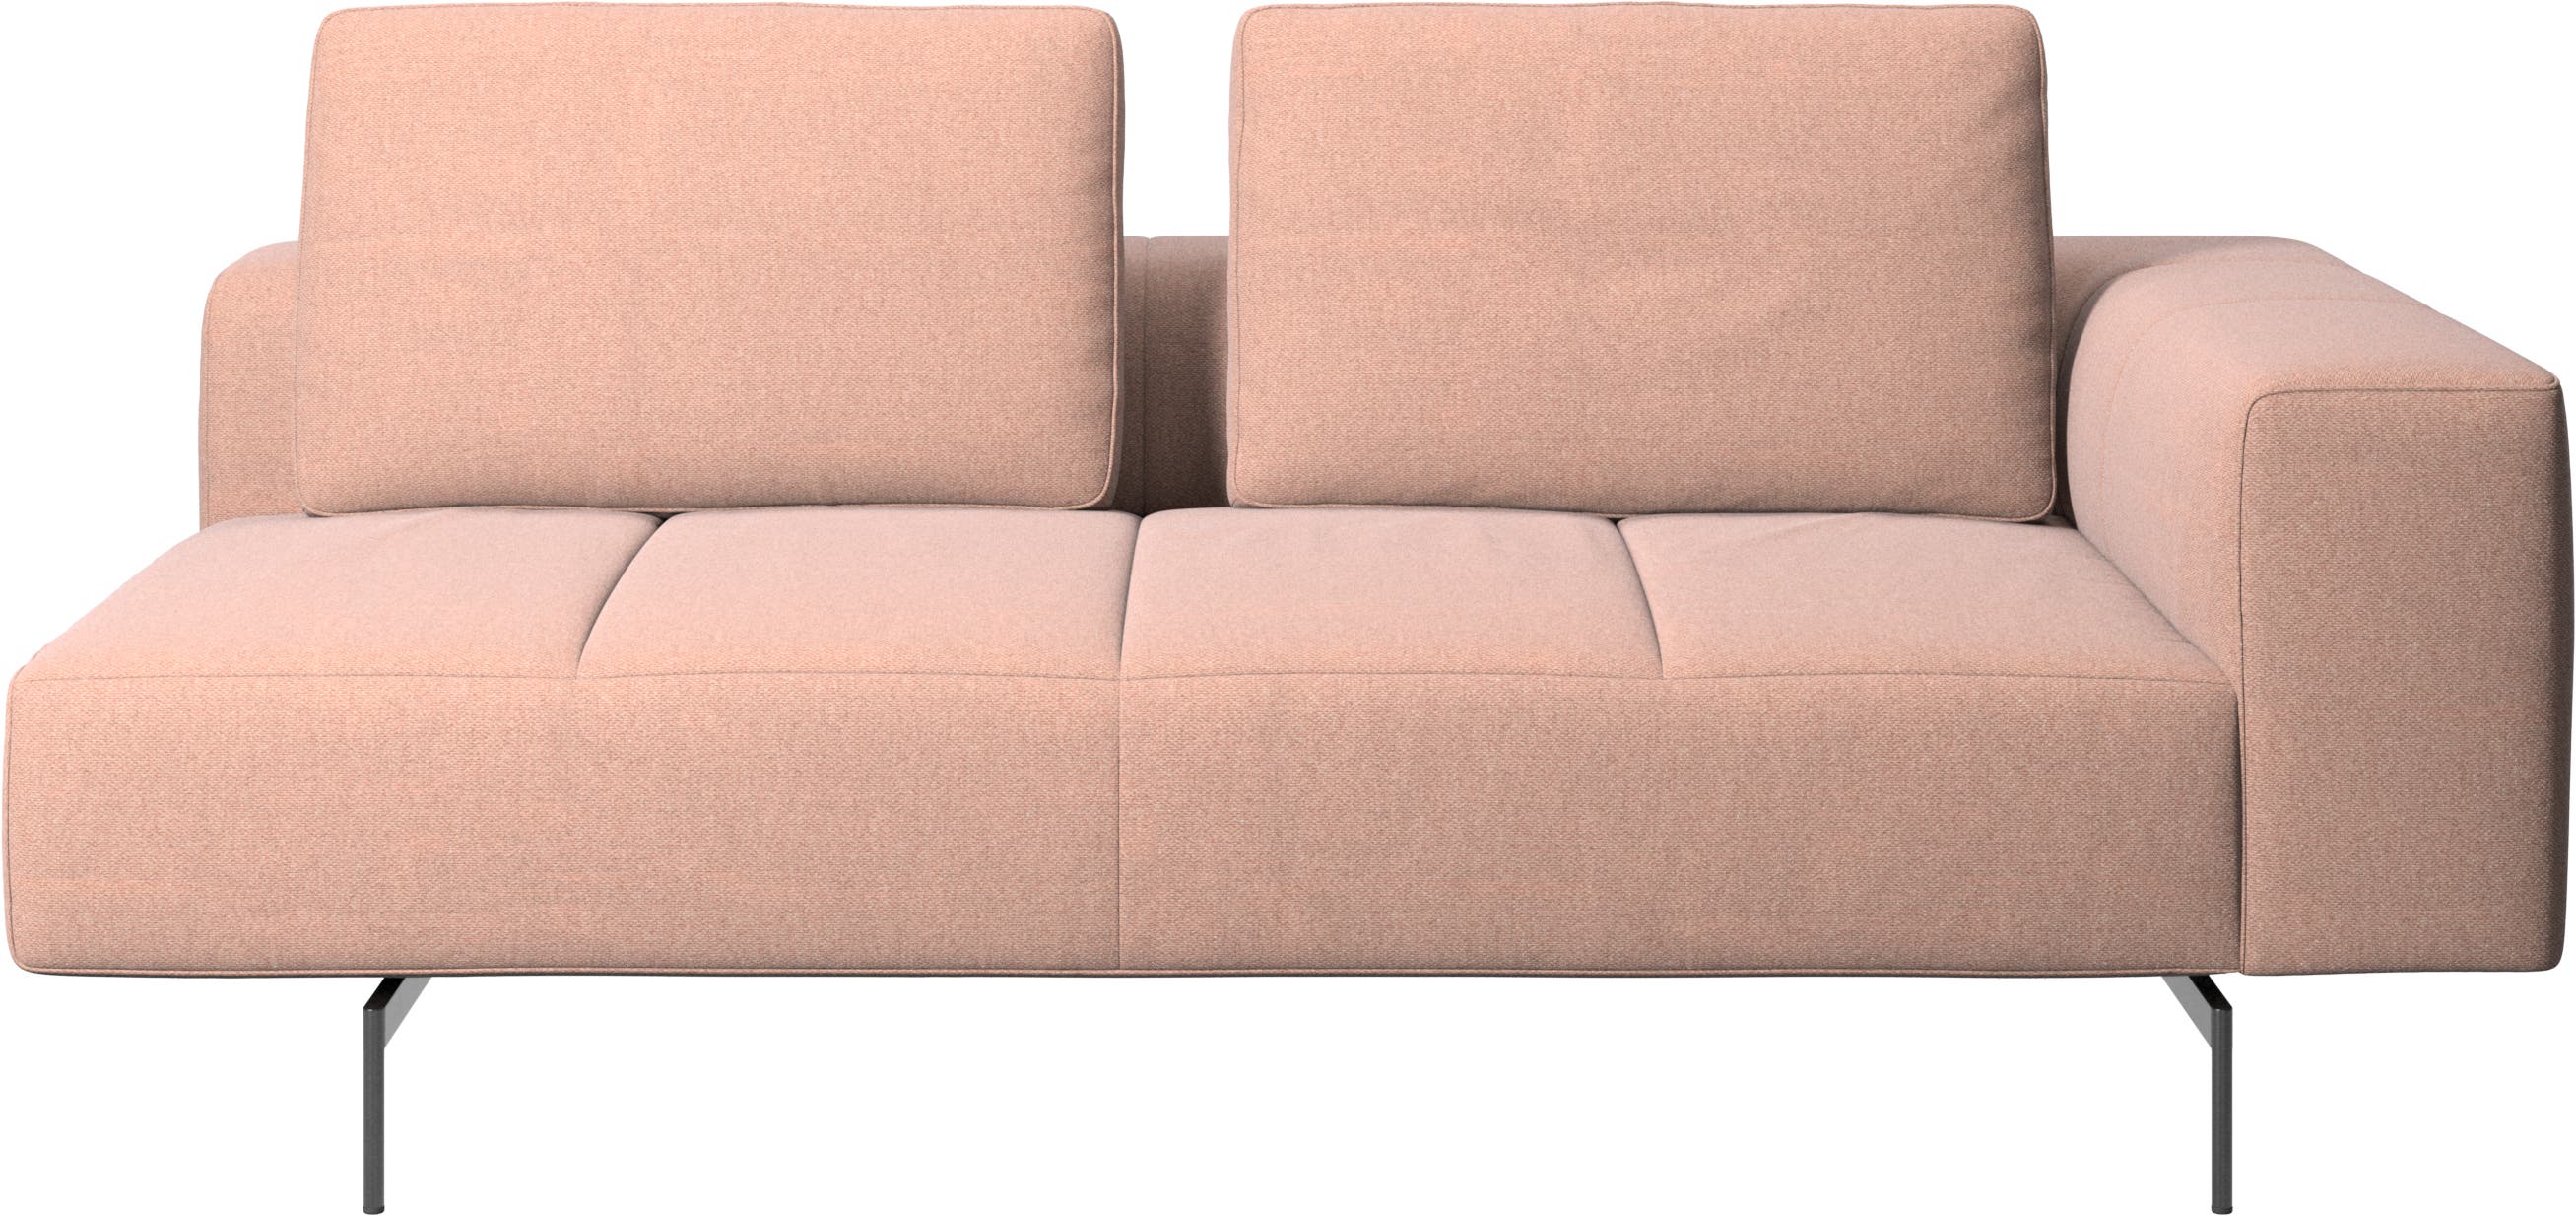 Amsterdam 2,5 seating module, armrest right